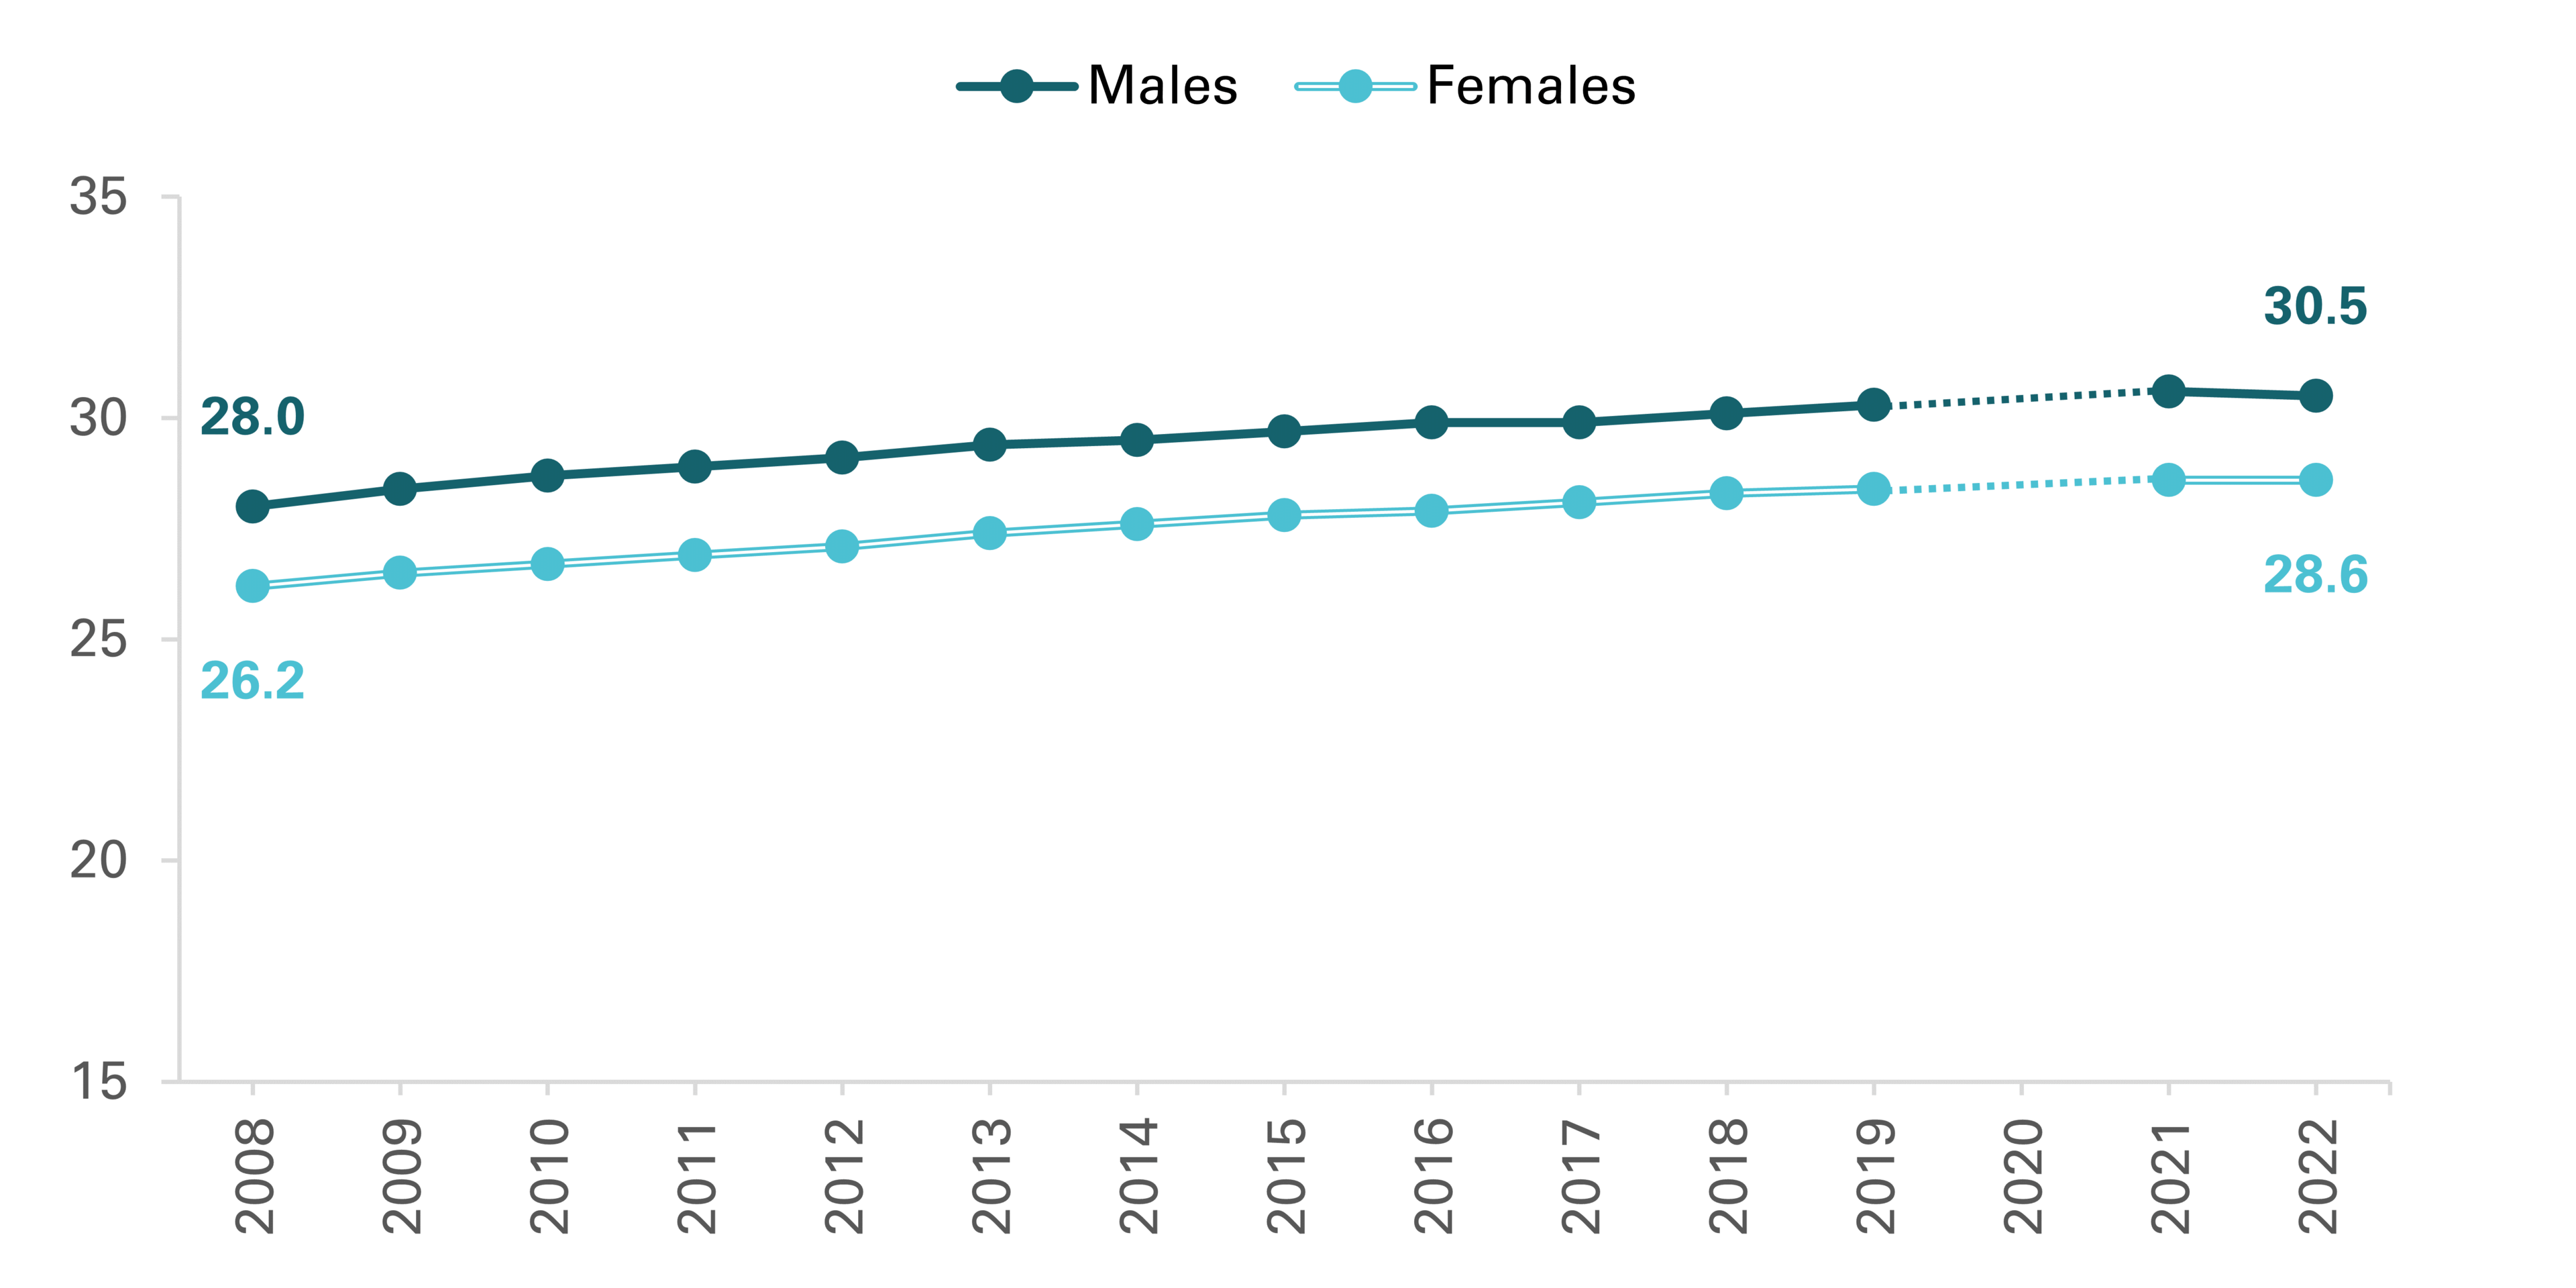 Figure 1. Median Age at First Marriage, 2008-2019 & 2021-2022